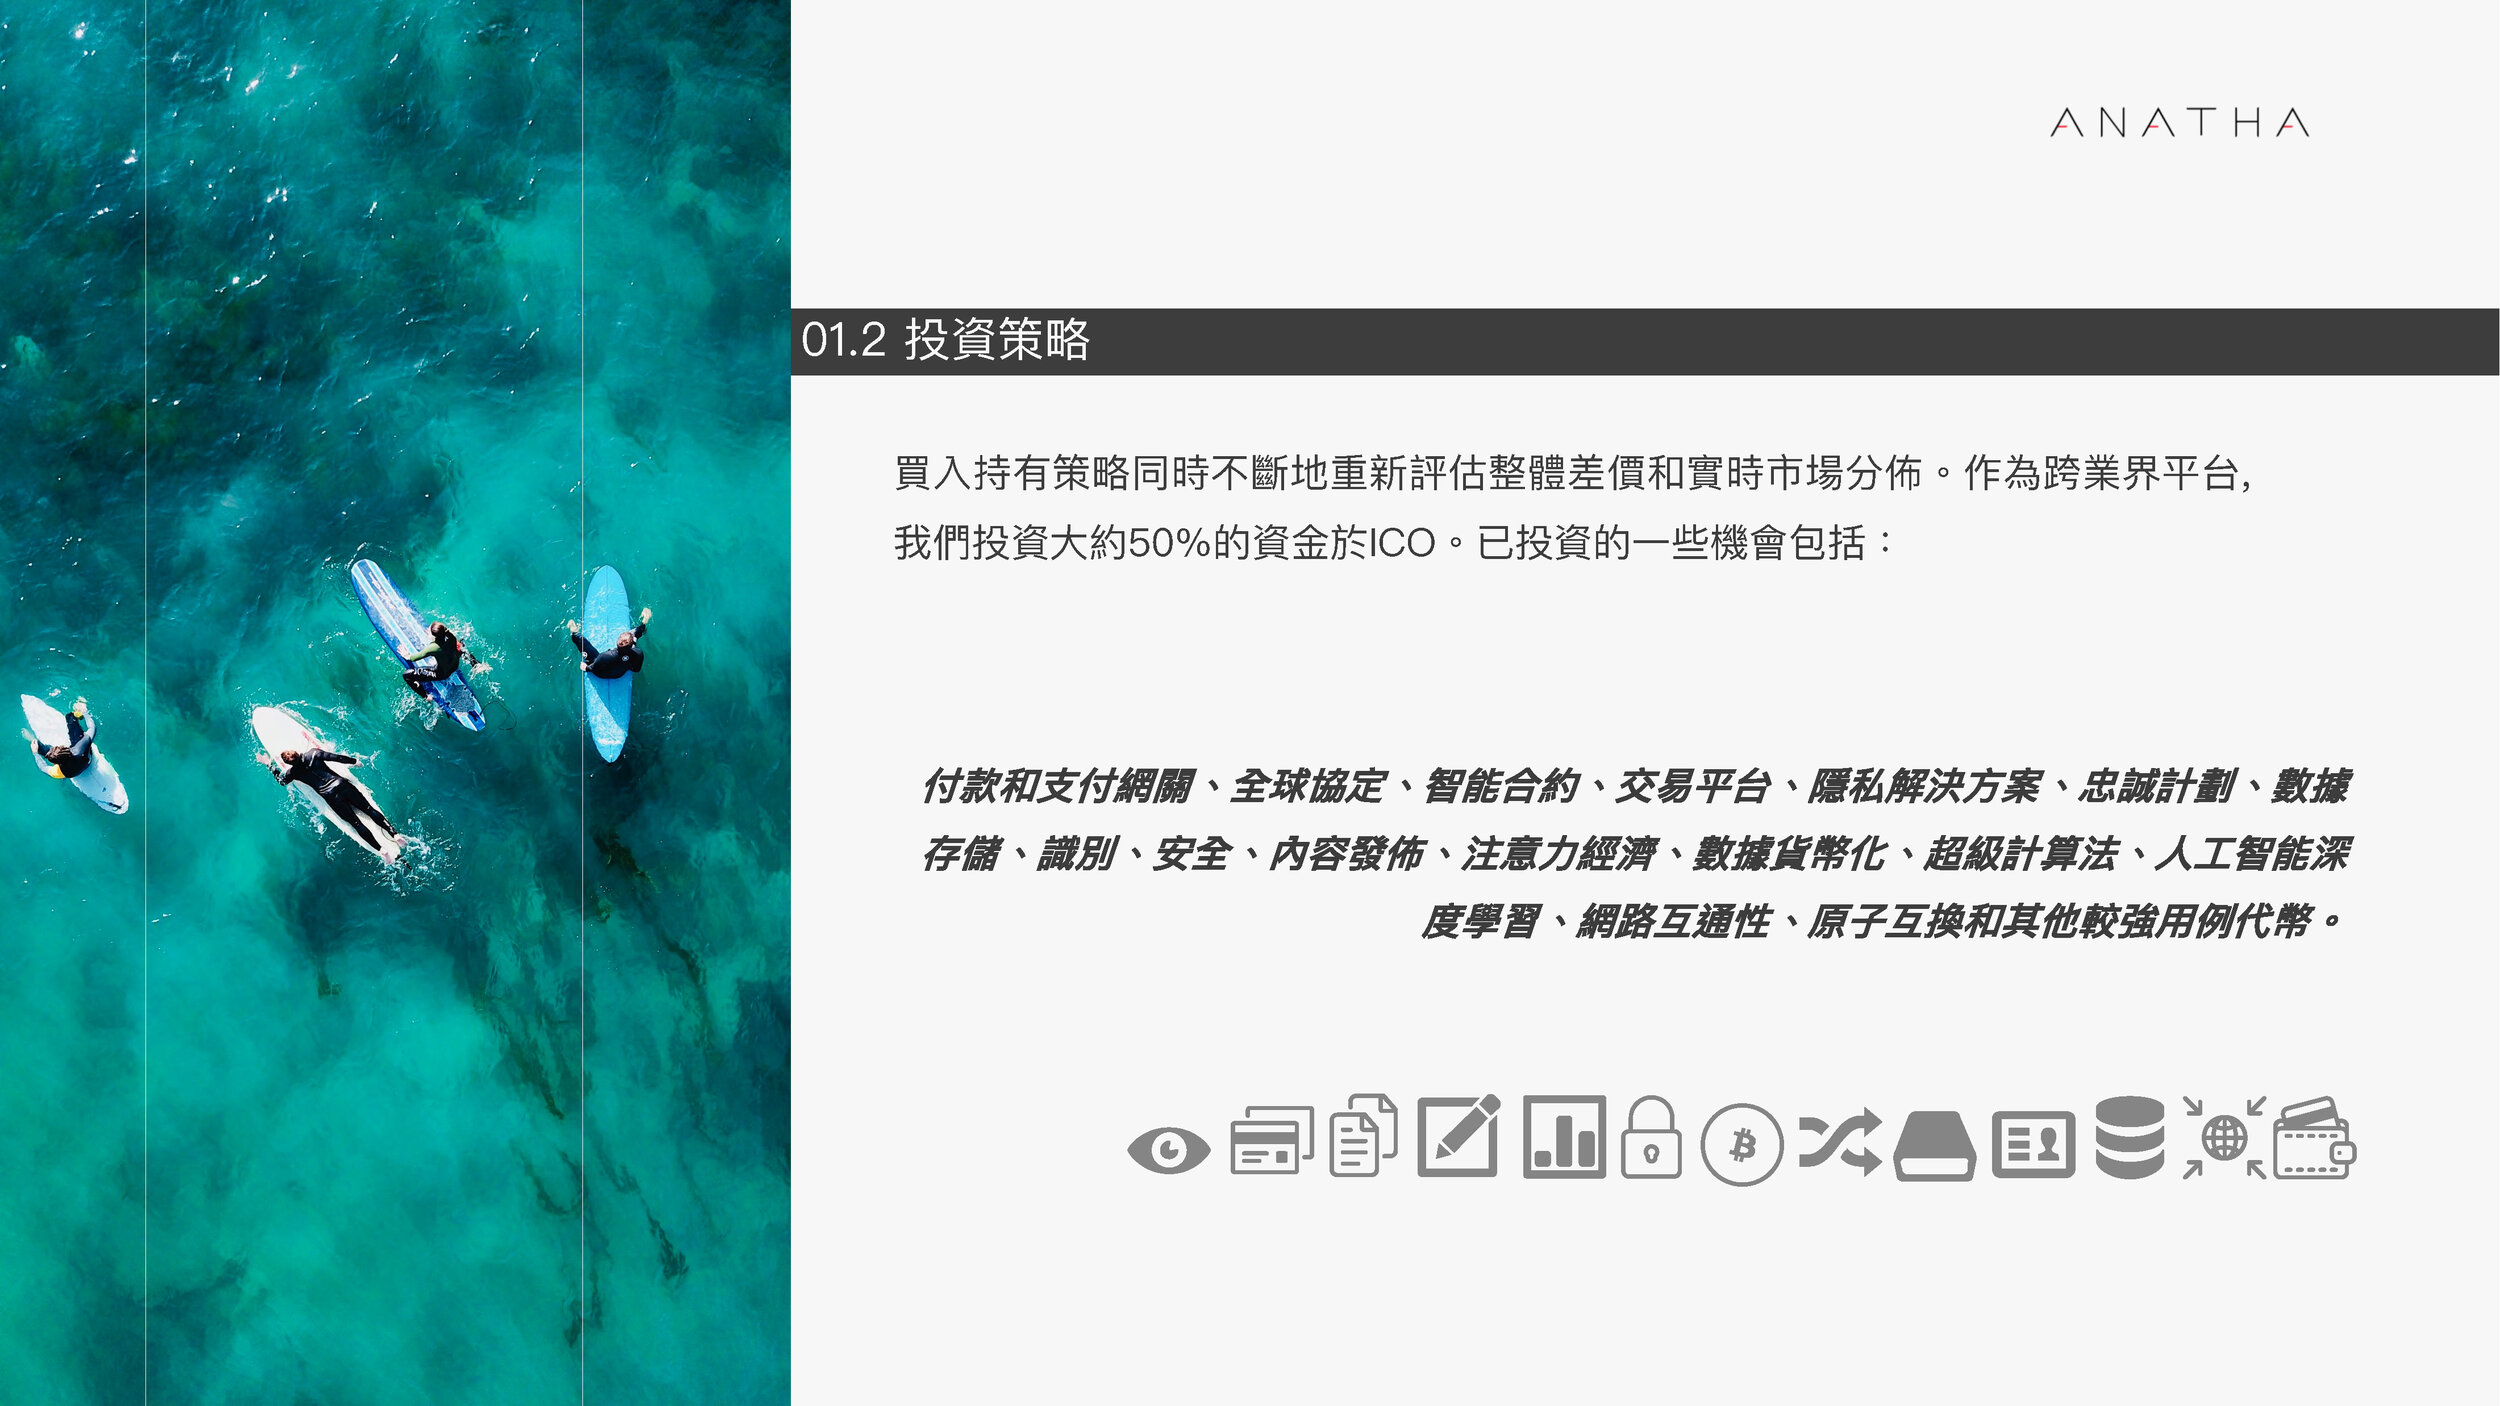 Anatha Pitch Deck - Traditional Chinese_Page_08.jpg